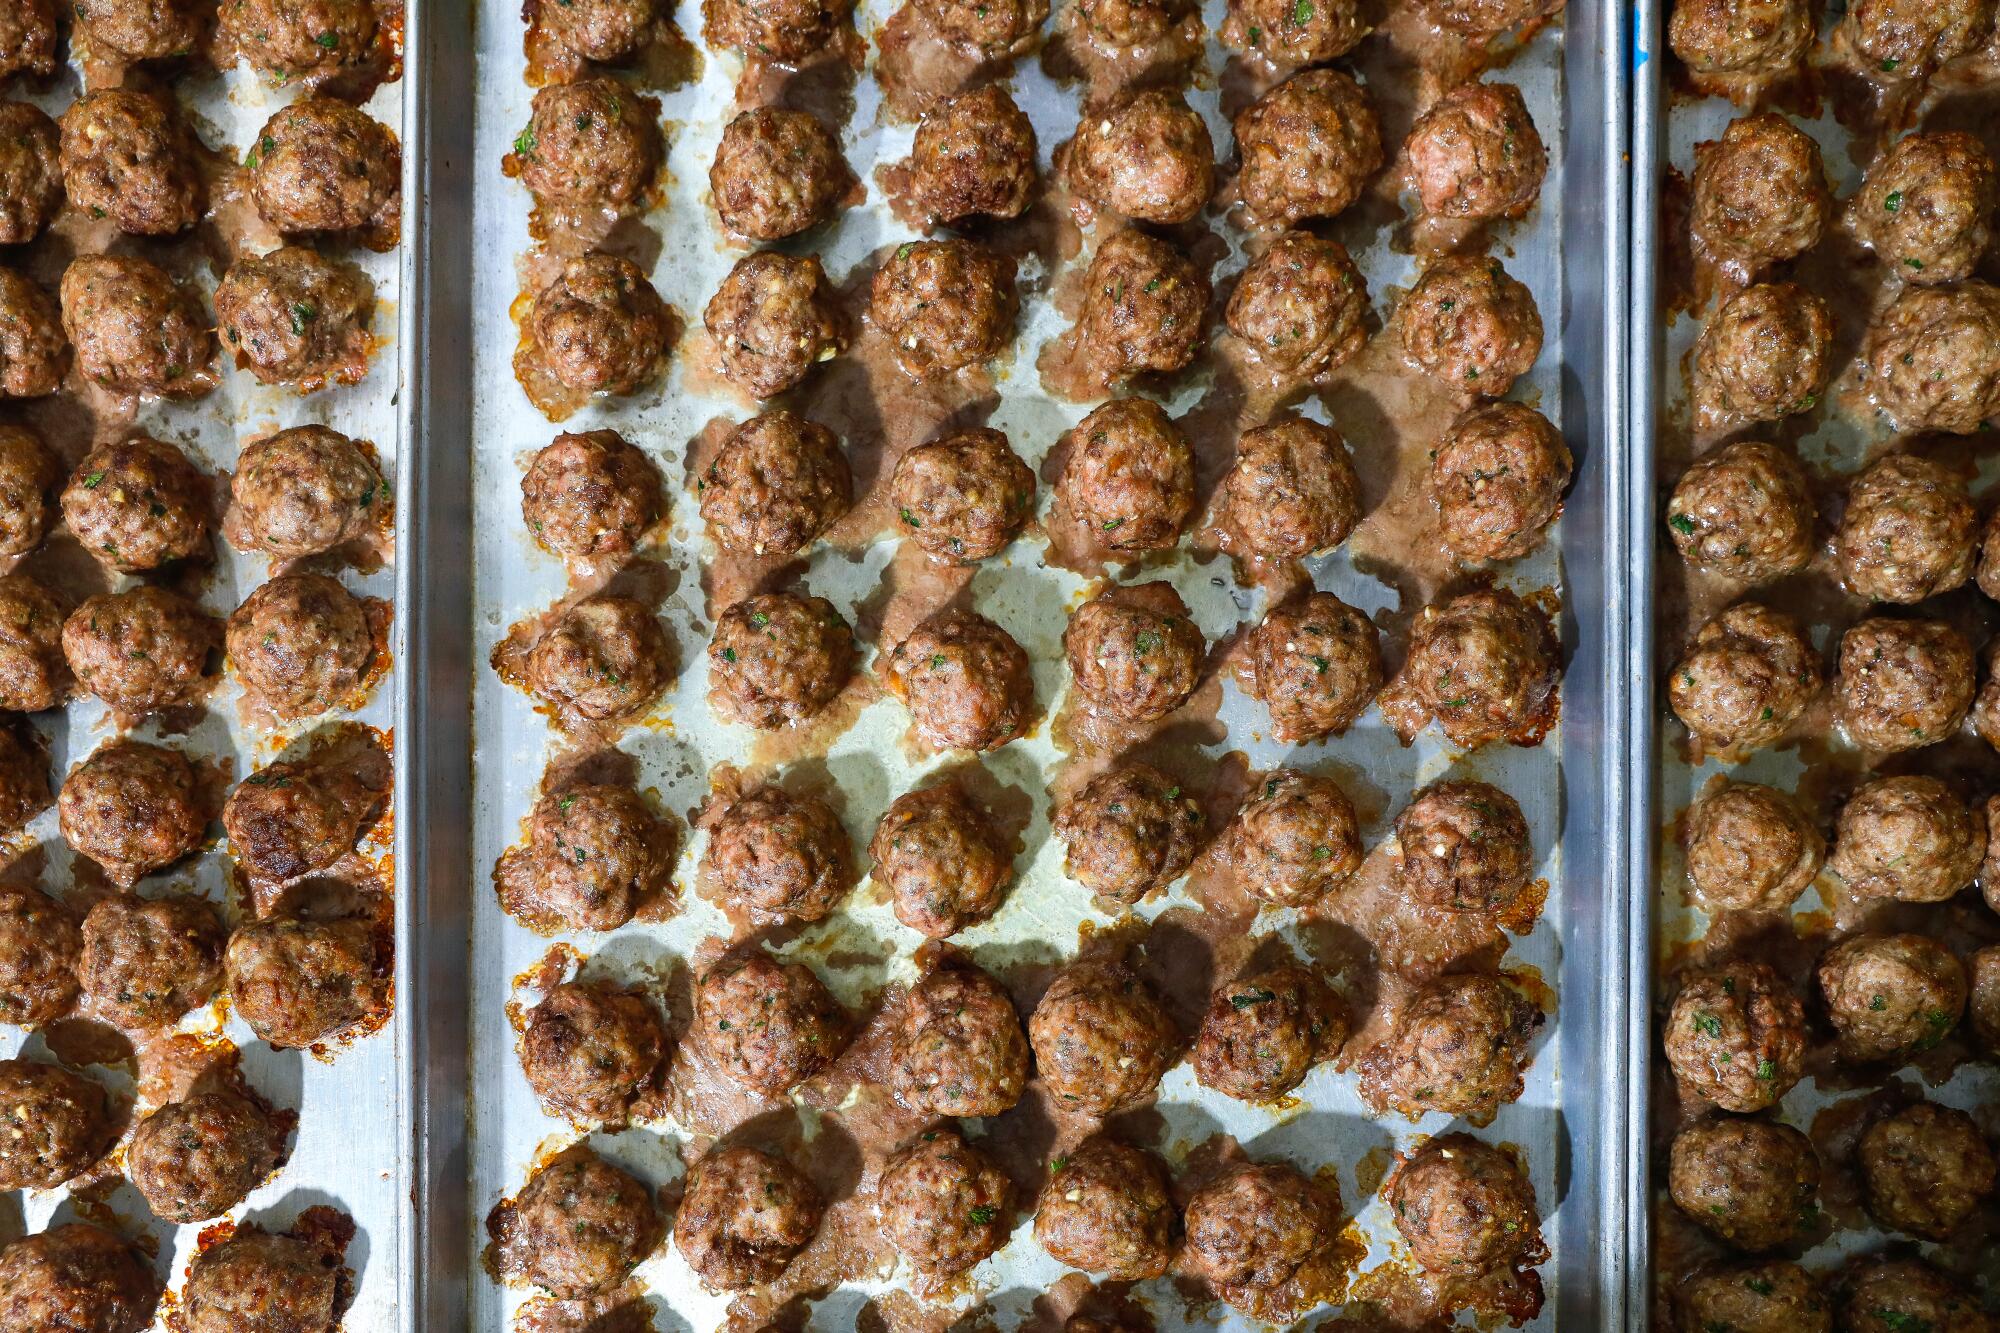 Meatballs fresh out of the oven line multiple pans.